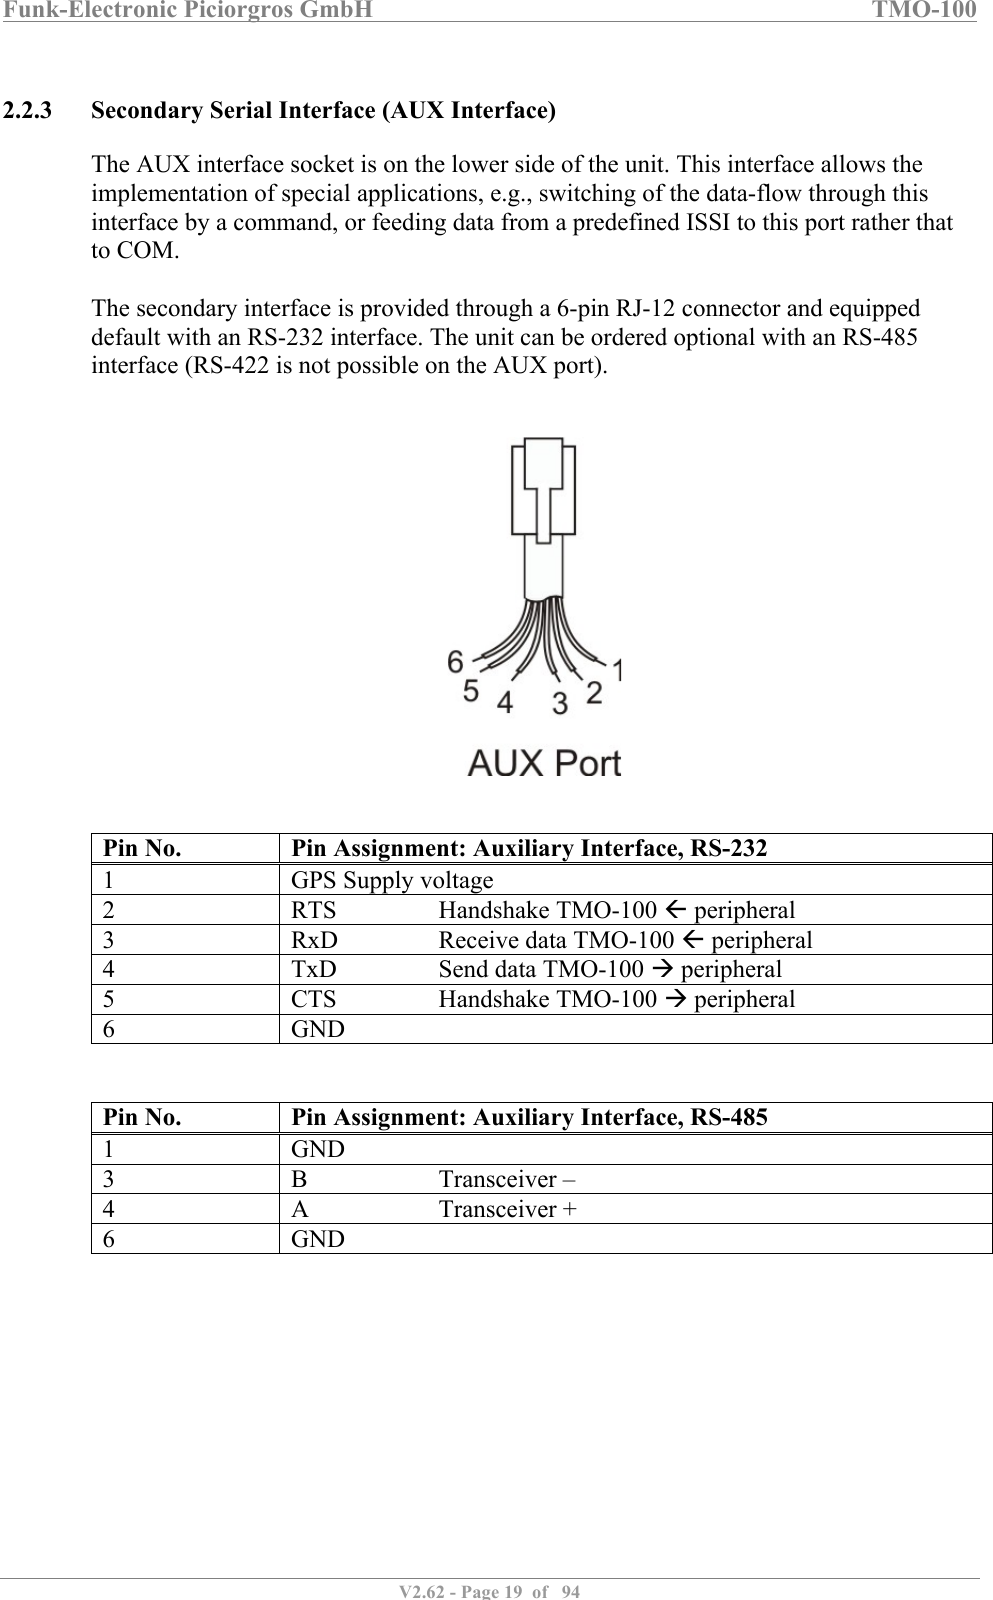 Funk-Electronic Piciorgros GmbH   TMO-100   V2.62 - Page 19  of   94   2.2.3 Secondary Serial Interface (AUX Interface) The AUX interface socket is on the lower side of the unit. This interface allows the implementation of special applications, e.g., switching of the data-flow through this interface by a command, or feeding data from a predefined ISSI to this port rather that to COM.  The secondary interface is provided through a 6-pin RJ-12 connector and equipped default with an RS-232 interface. The unit can be ordered optional with an RS-485 interface (RS-422 is not possible on the AUX port).      Pin No. Pin Assignment: Auxiliary Interface, RS-232 1 GPS Supply voltage 2 RTS    Handshake TMO-100  peripheral 3 RxD    Receive data TMO-100  peripheral 4 TxD    Send data TMO-100  peripheral 5 CTS    Handshake TMO-100  peripheral 6 GND   Pin No. Pin Assignment: Auxiliary Interface, RS-485 1 GND 3 B    Transceiver – 4 A    Transceiver + 6 GND  